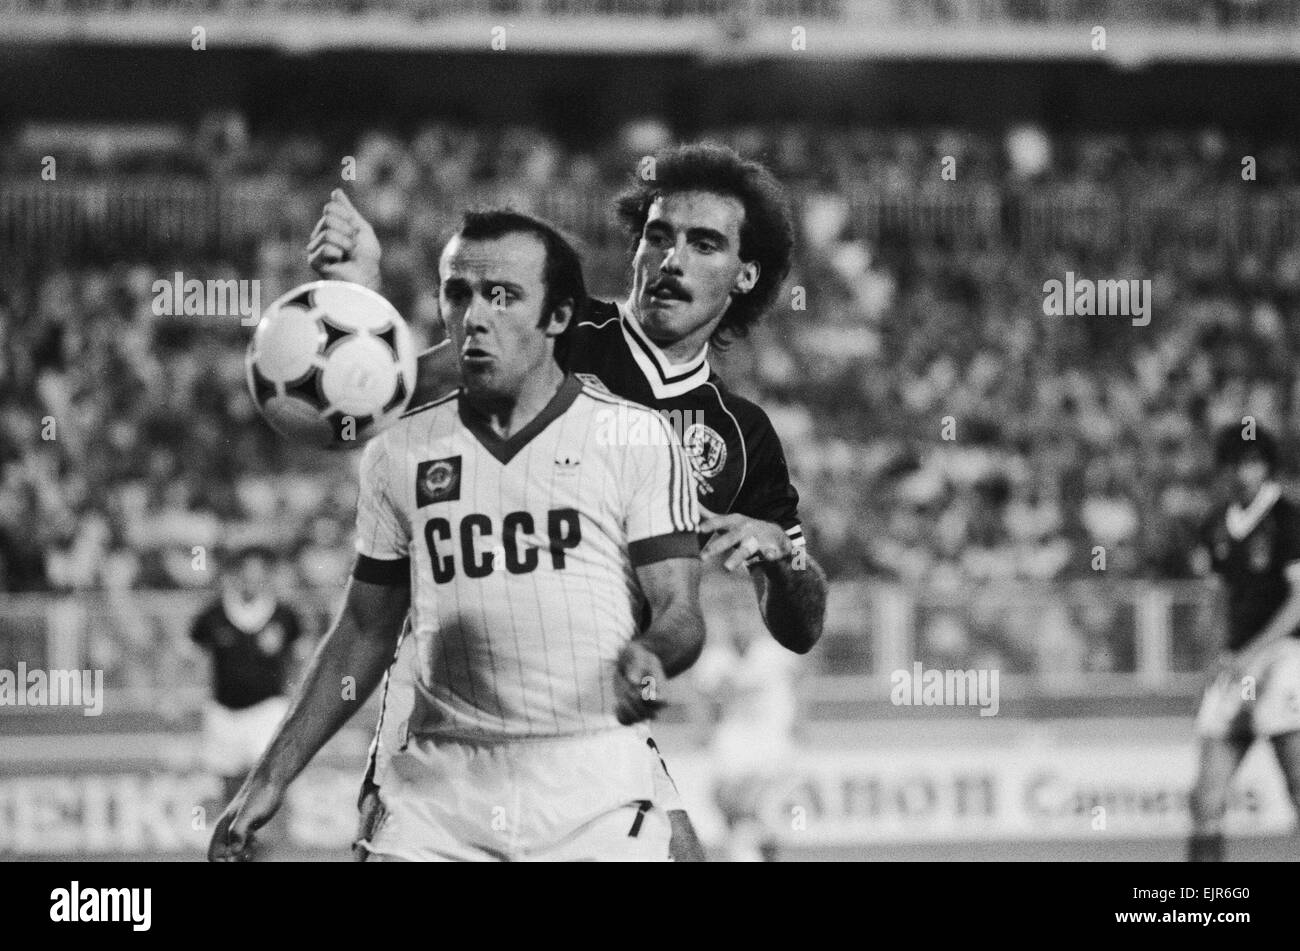 1982 World Cup Finals in Malaga, Spain. Soviet Union 2 v Scotland 2. Soviet Union's Ramaz Shengelia is challenged for the ball by Willie Miller of Scotland. 22nd June 1982. Stock Photo